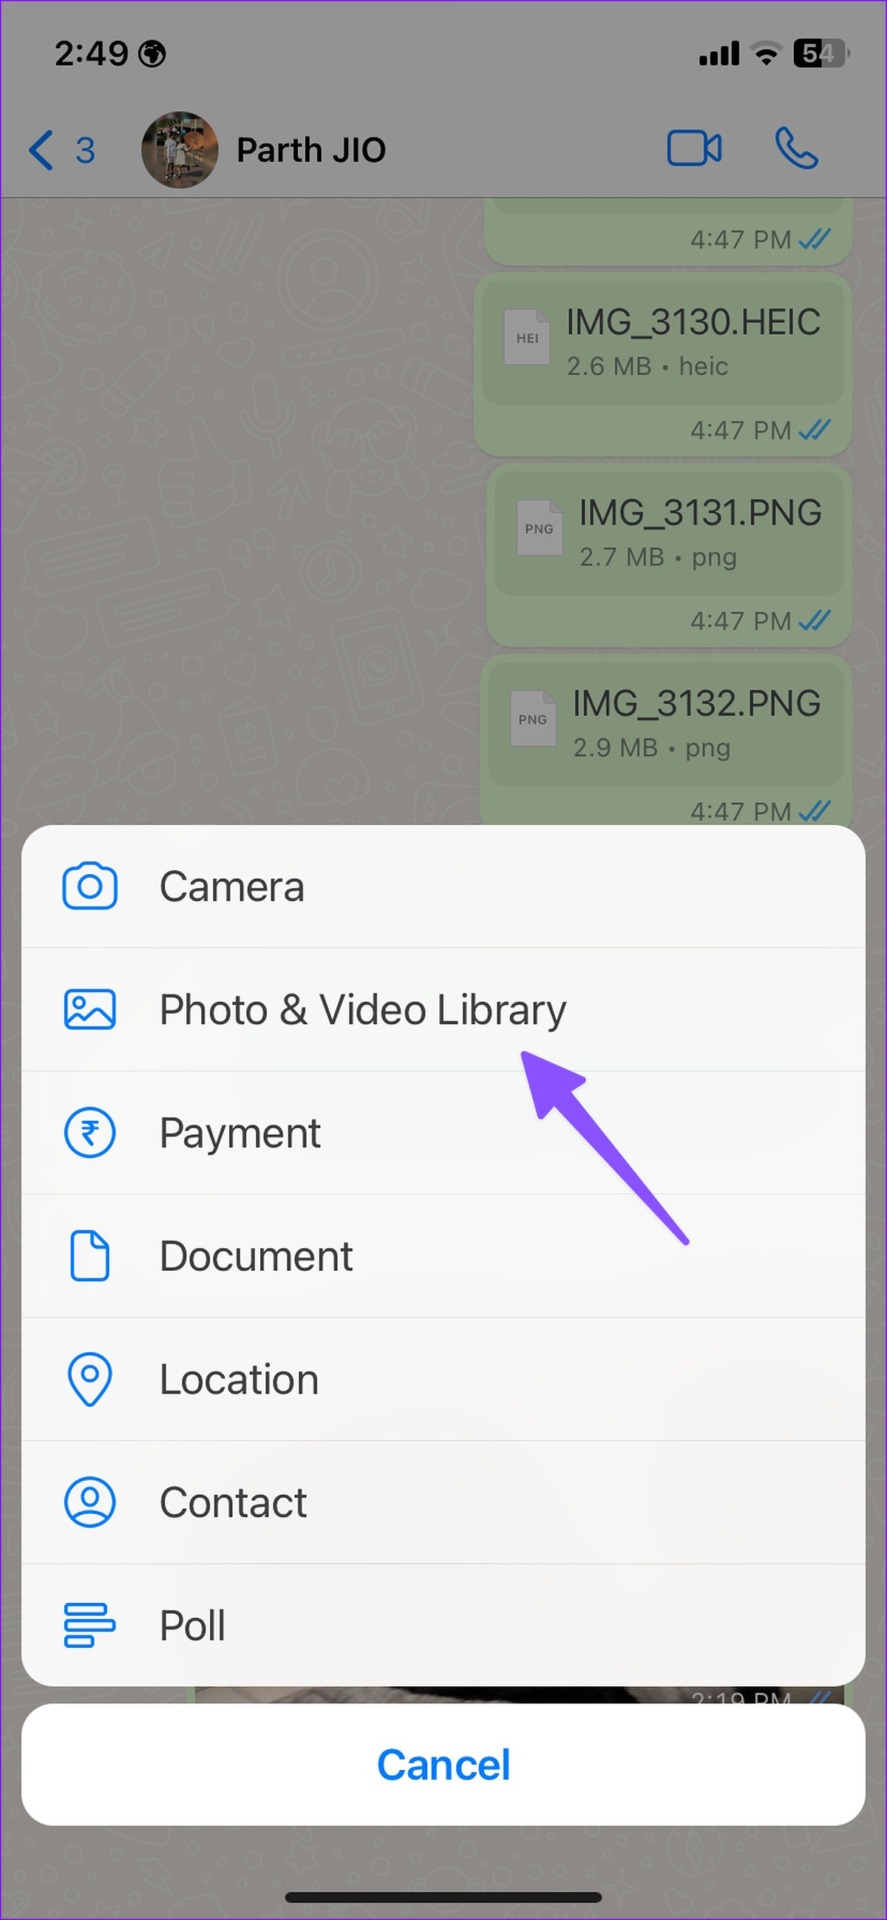 open photos and video library